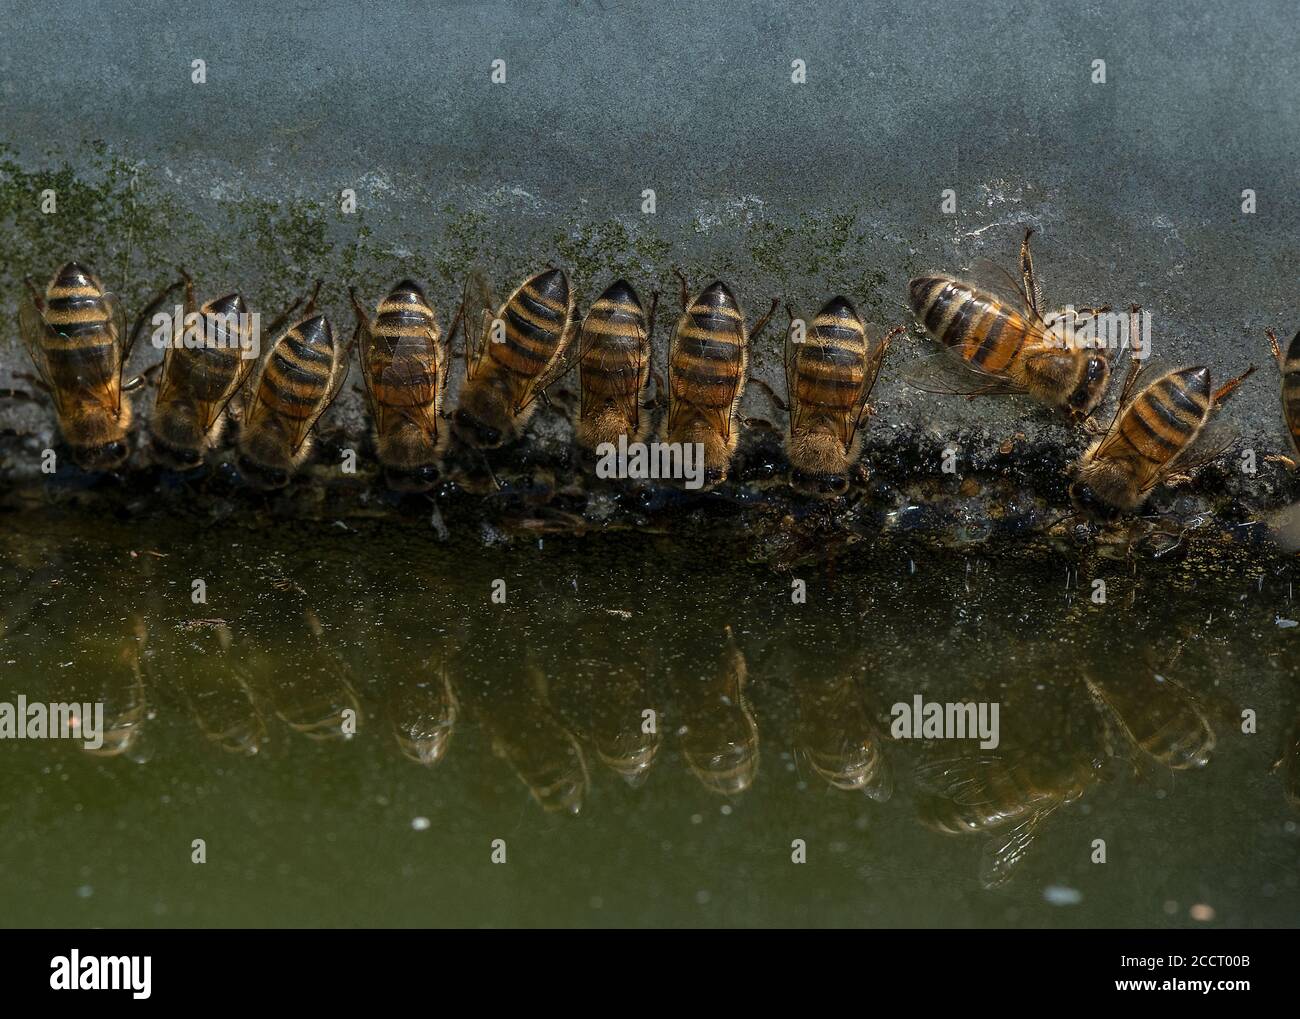 Worker Honey-bees, Apis mellifera, drinking on vertical surface at water trough. Hampshire. Stock Photo